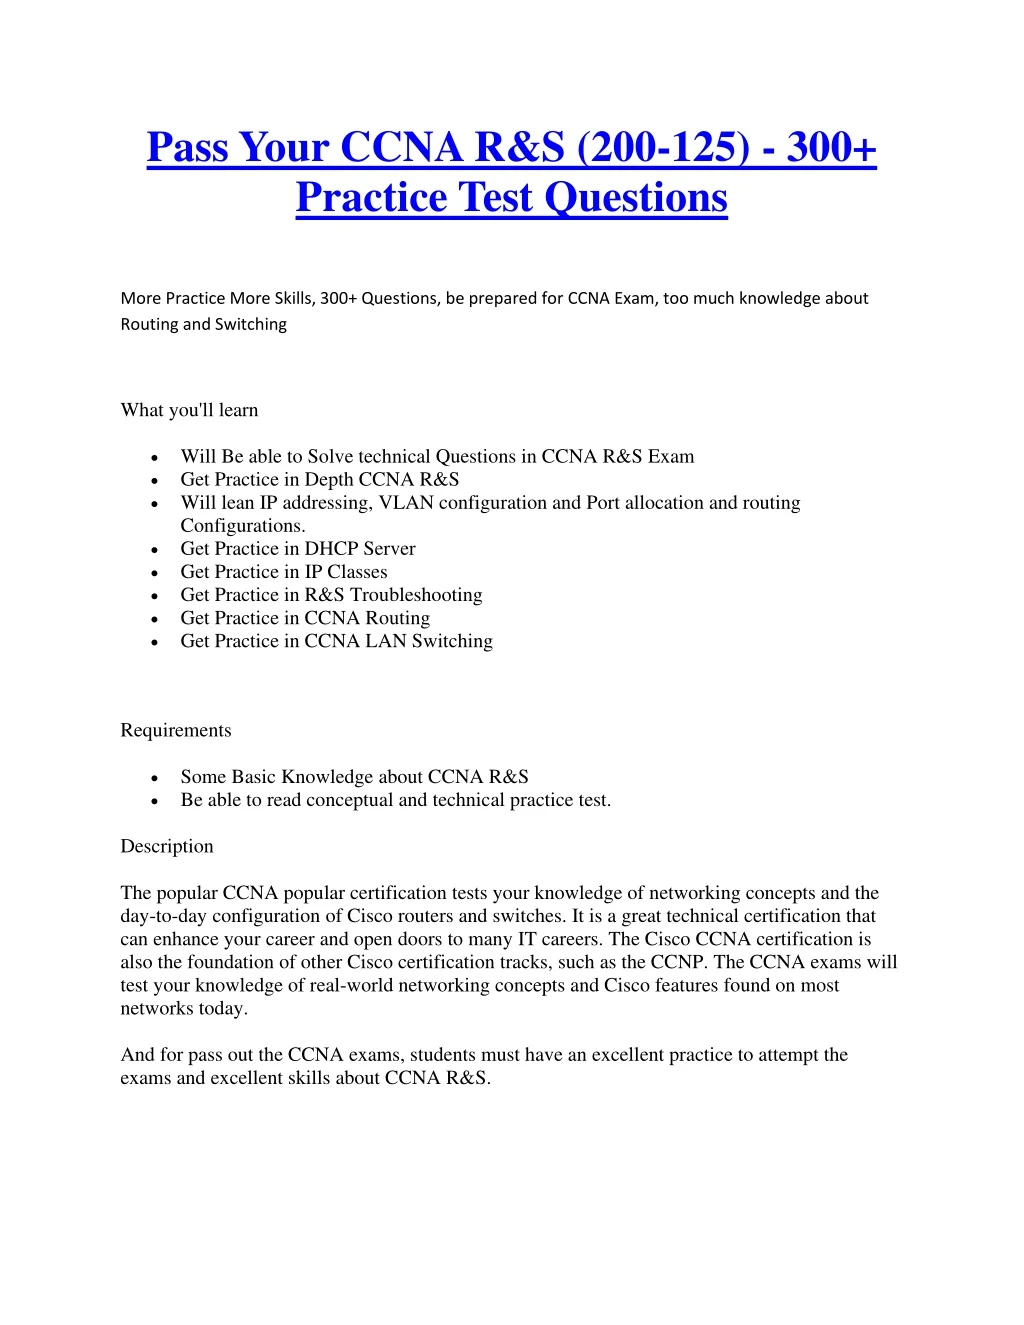 pass your ccna r s 200 125 300 practice test